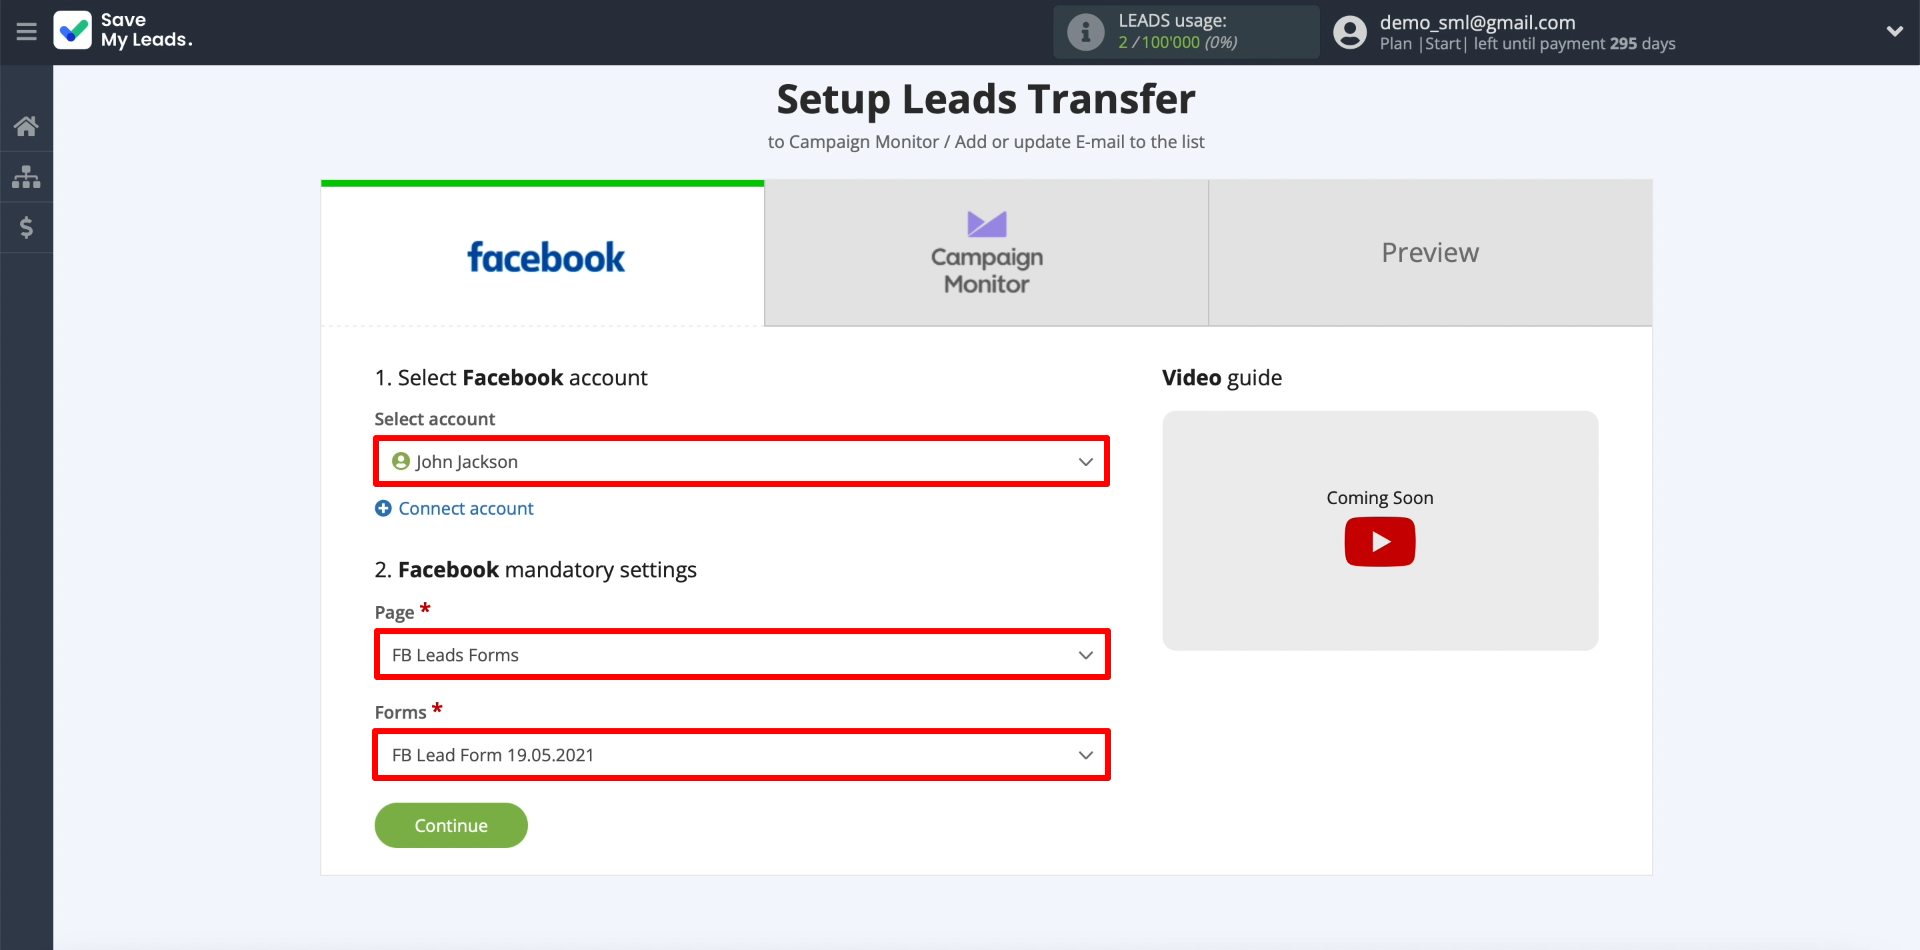 Facebook and Campaign Monitor integration | Setting up data upload